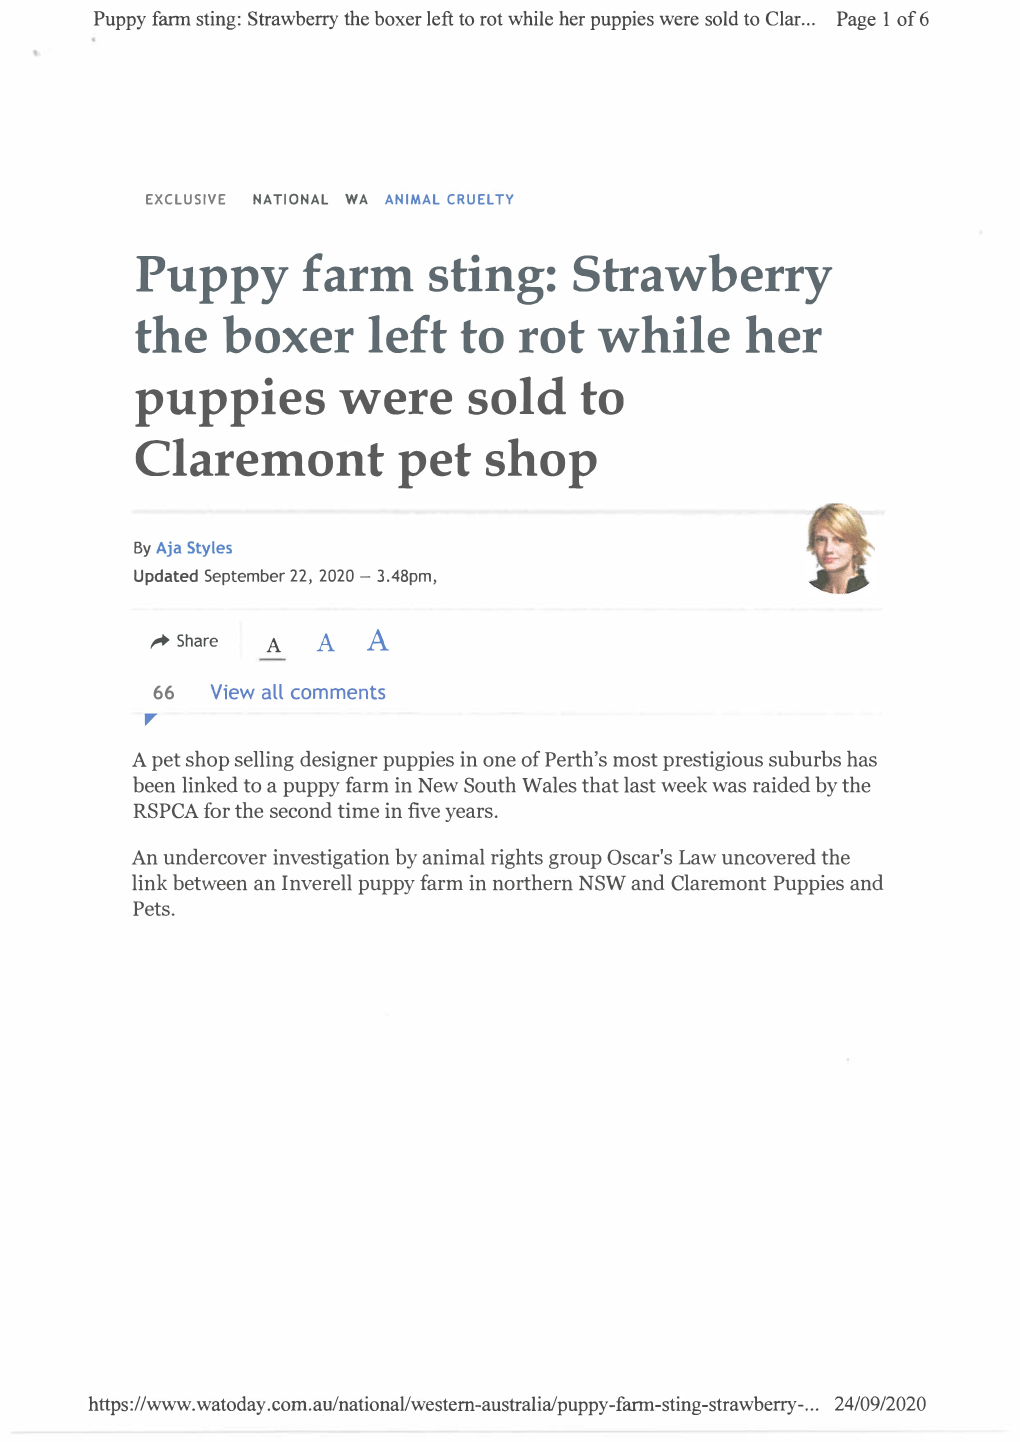 Puppy Farm Sting: Straw-Berry the Boxer Left to Rot W-Hileher Puppies W-Eresold to Claretnontpet Shop